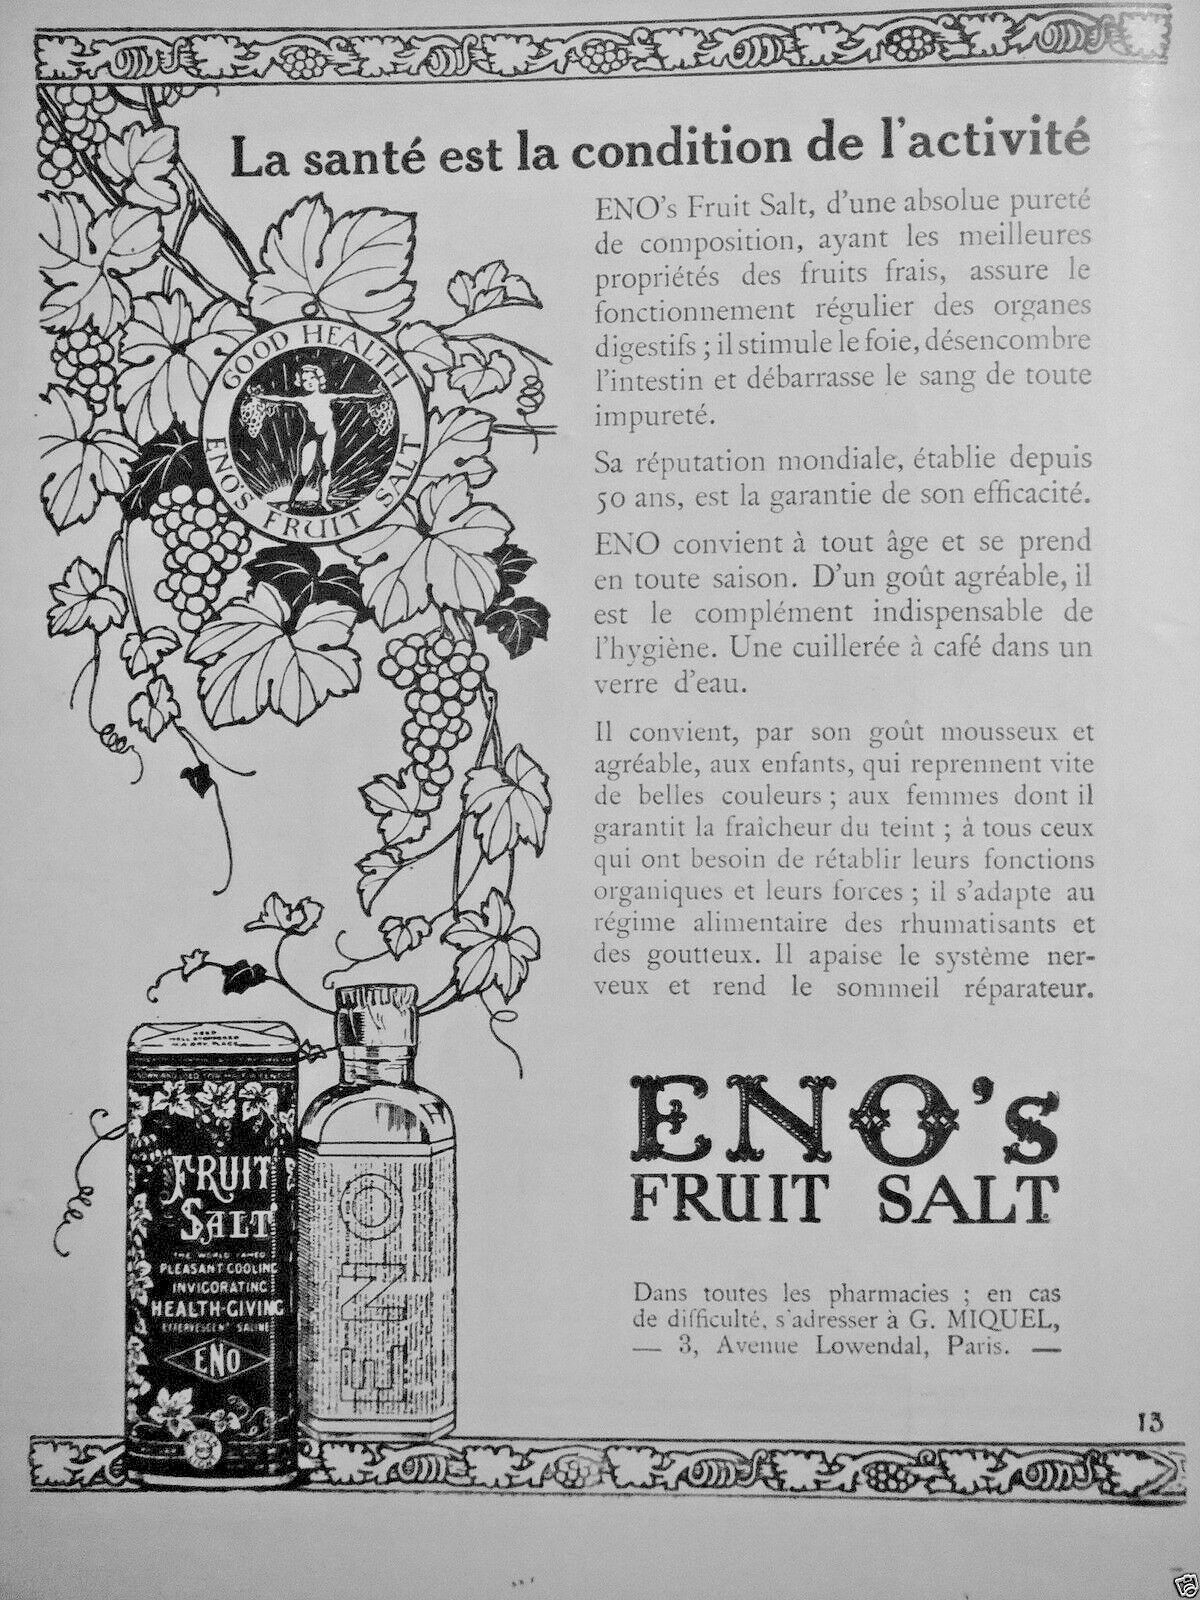 1922 ENO'S FRUIT SALT HEALTH IS ACTIVITY CONDITION ADVERTISING - ENOS